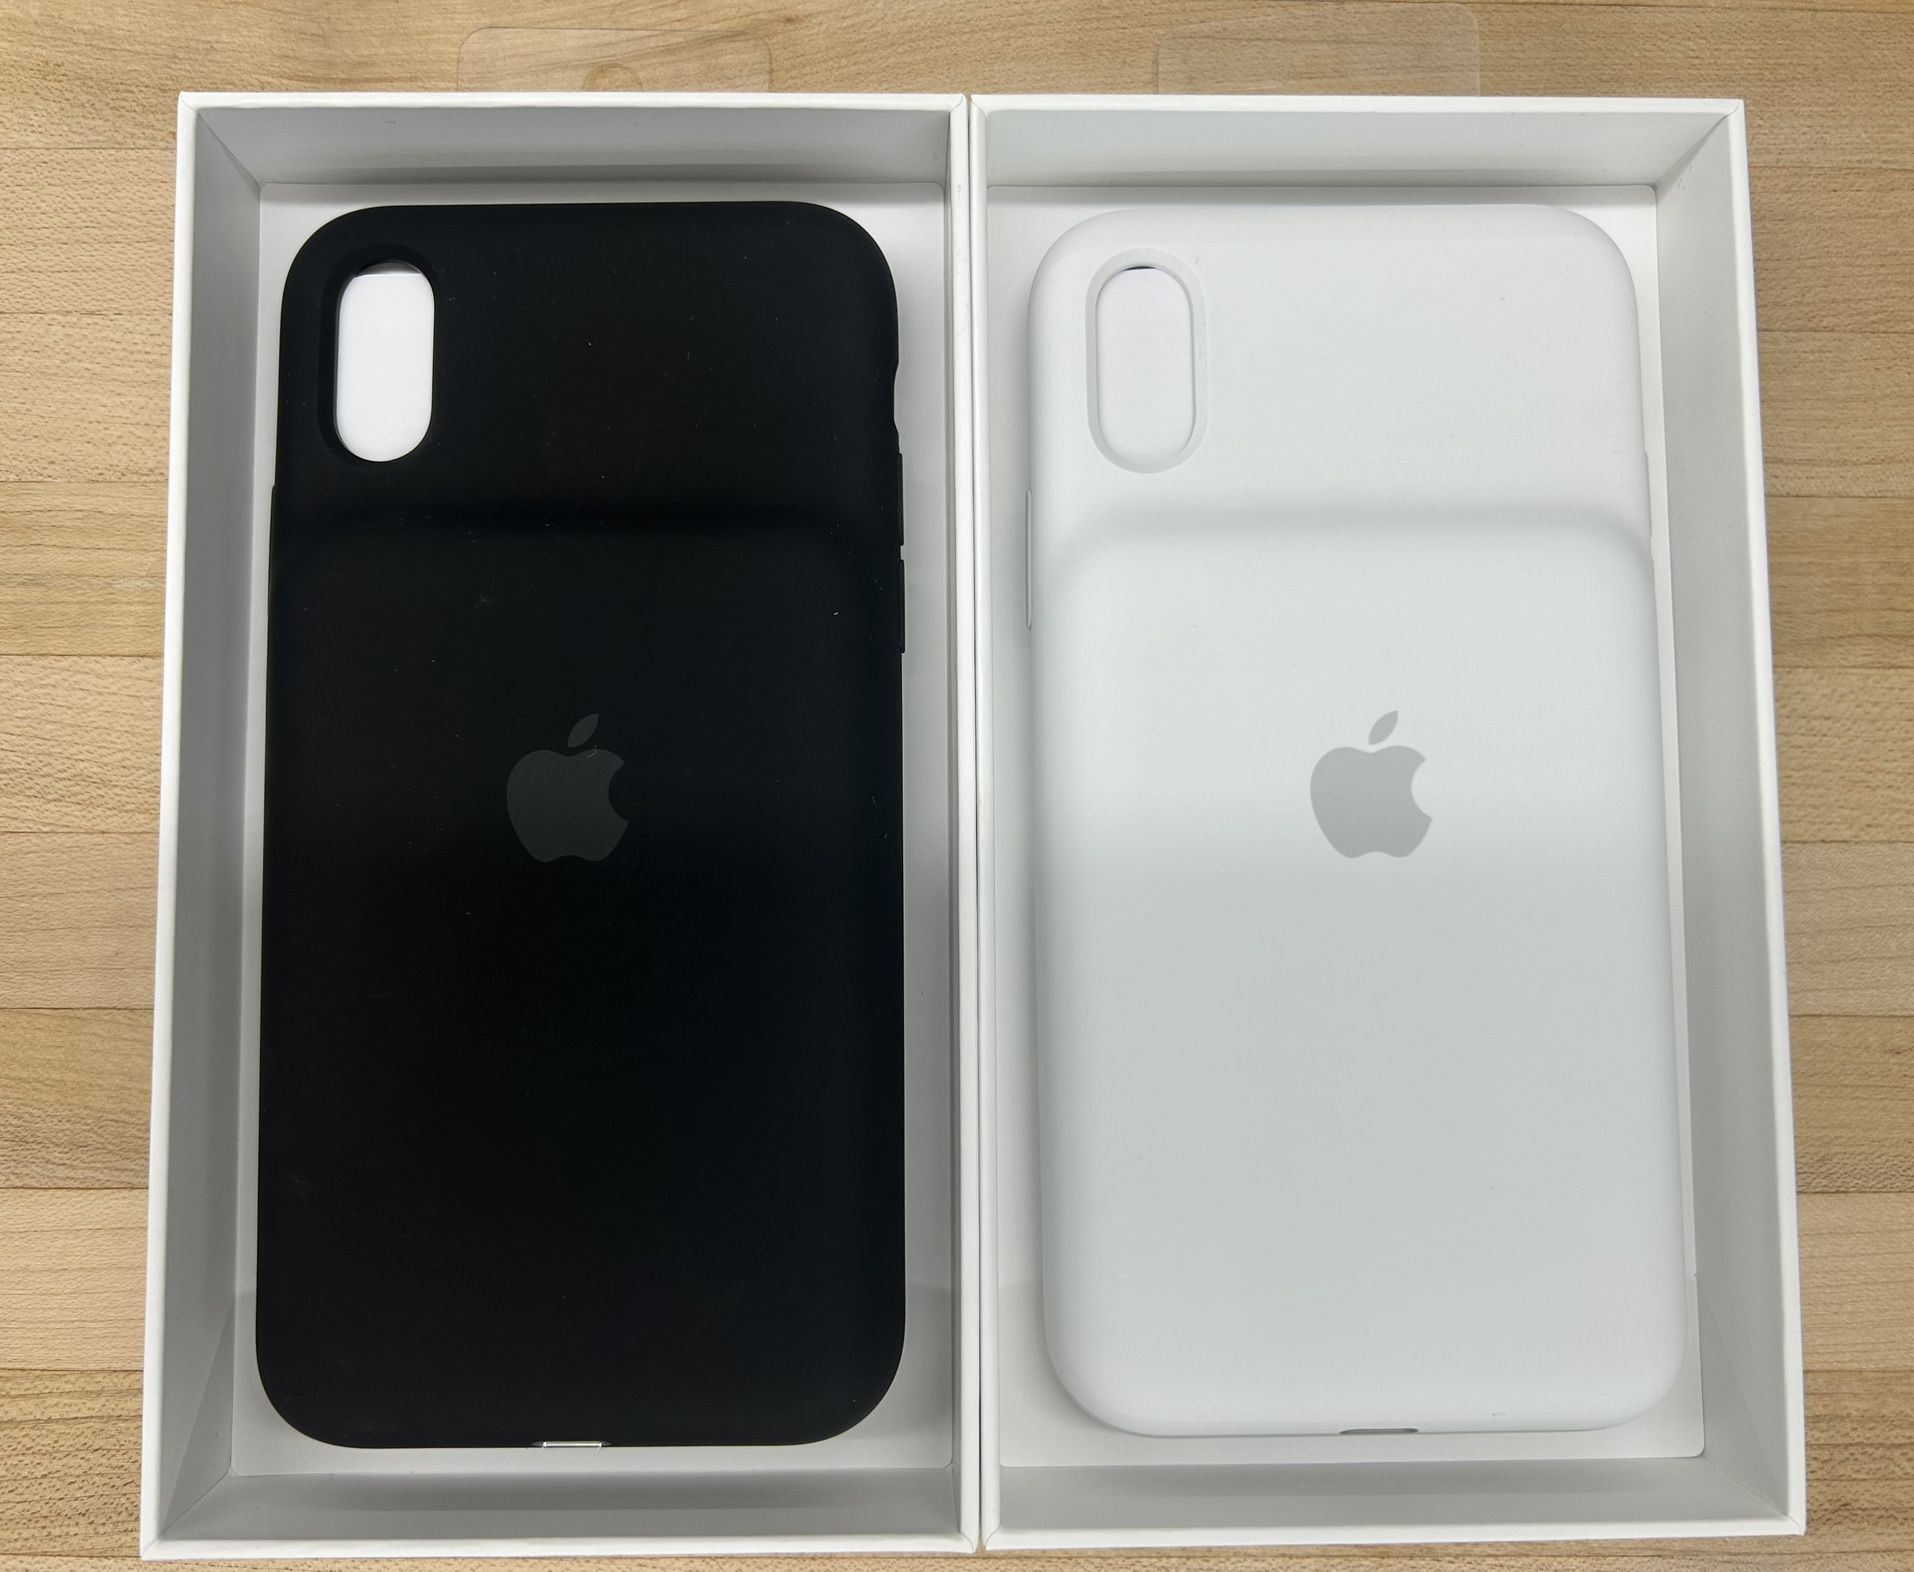 iPhone X/XS battery Case 